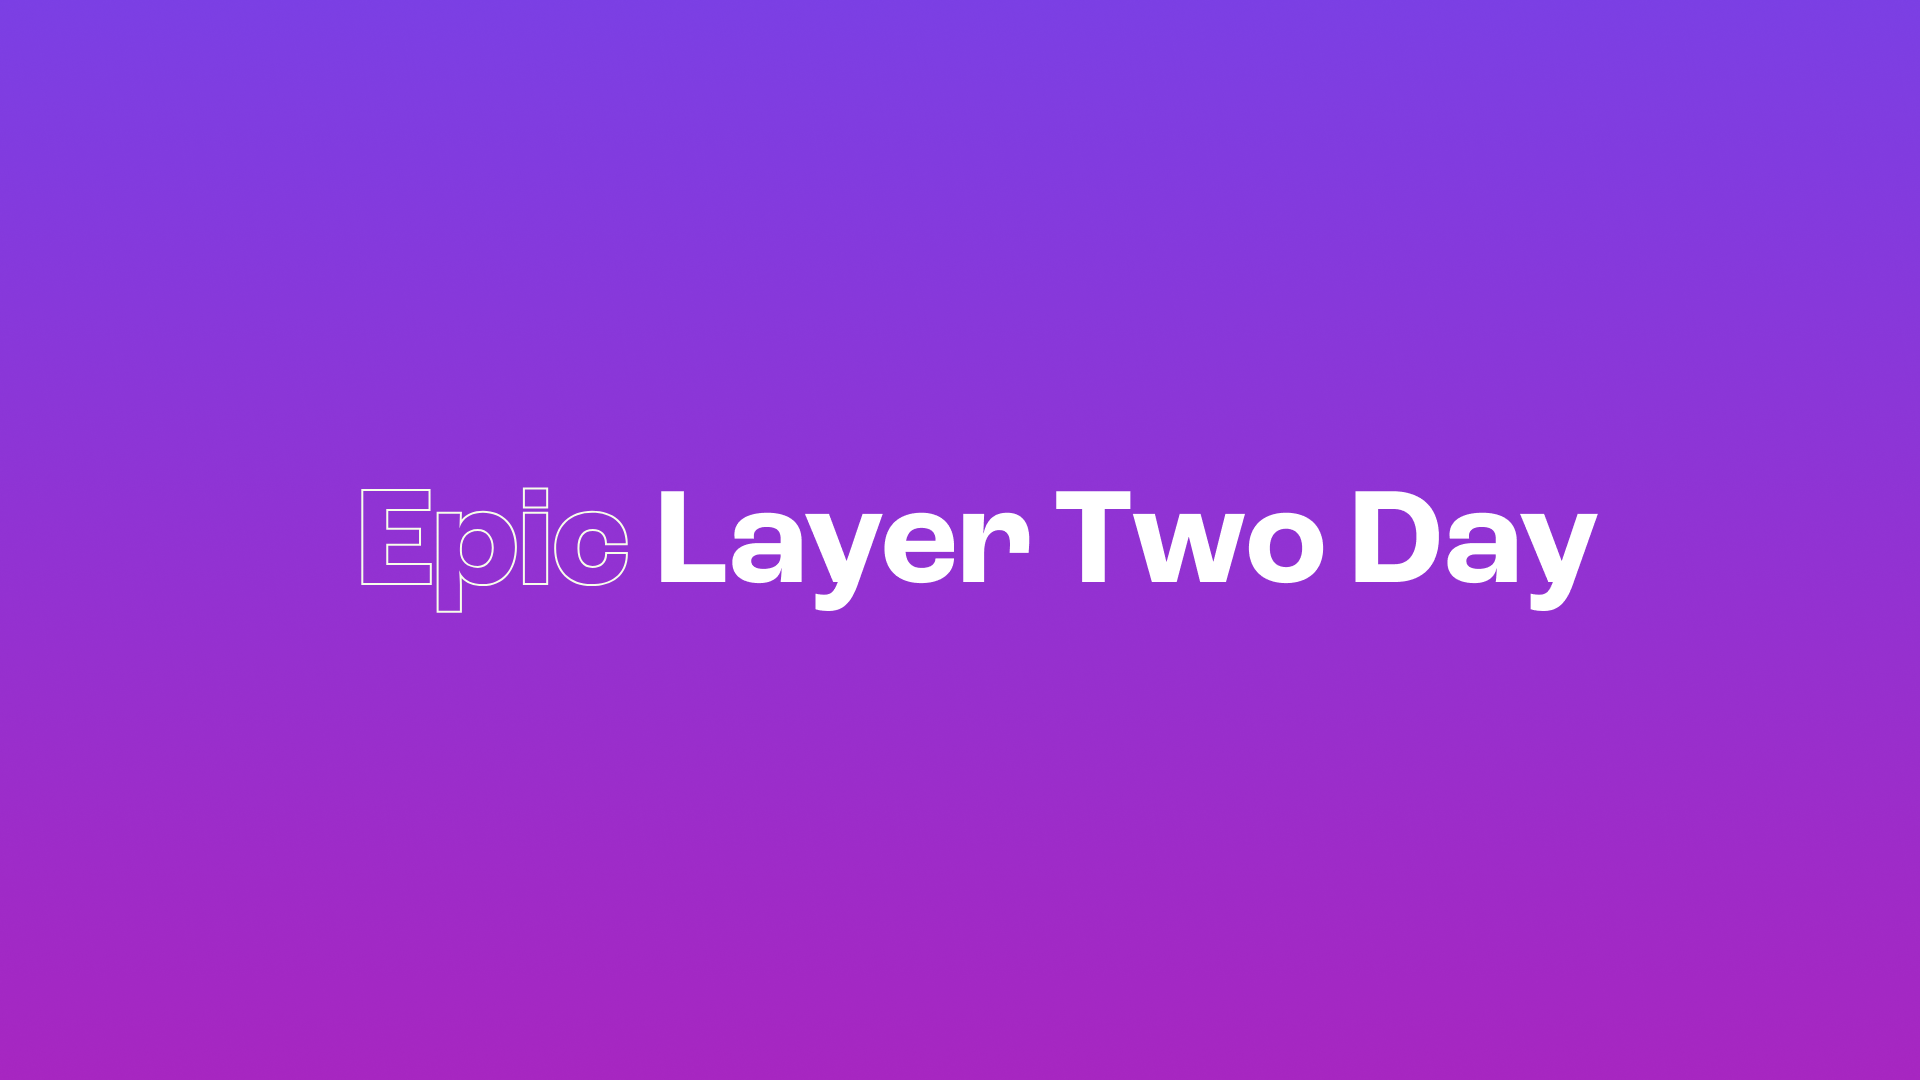 Epic Layer Two Day